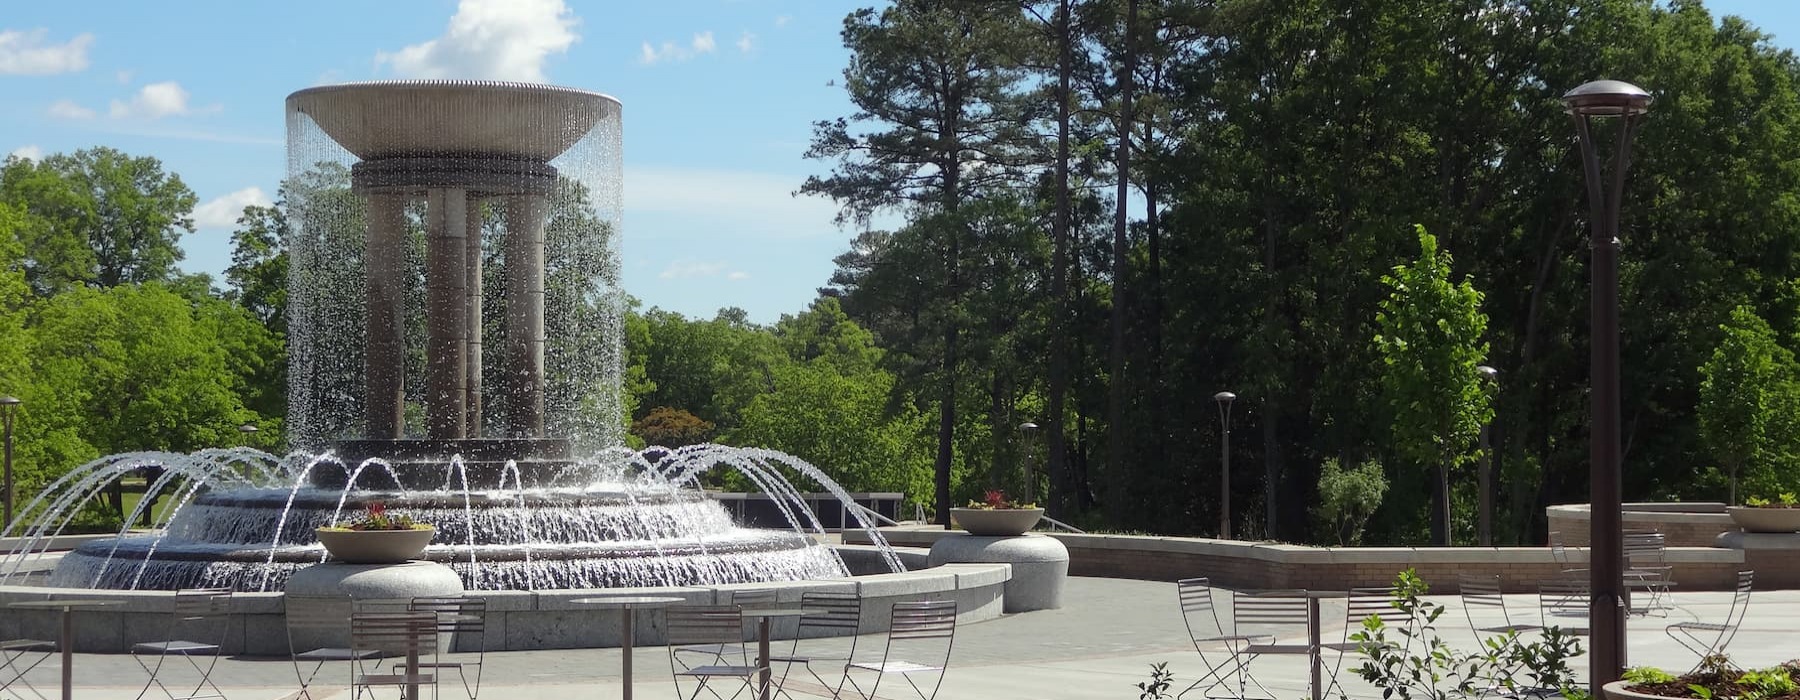 fountains and nearby landscaping